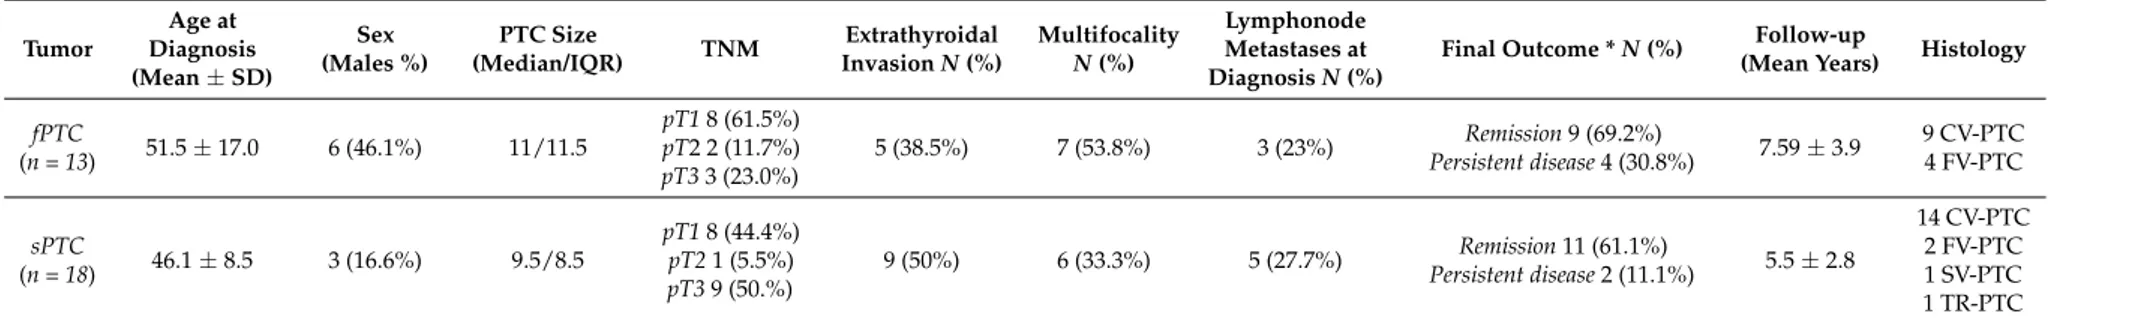 Table 1. Characteristics of patients. Tumor Age at Diagnosis (Mean ± SD) Sex (Males %) PTC Size (Median/IQR) TNM Extrathyroidal Invasion N (%) MultifocalityN (%) LymphonodeMetastases at Diagnosis N (%)